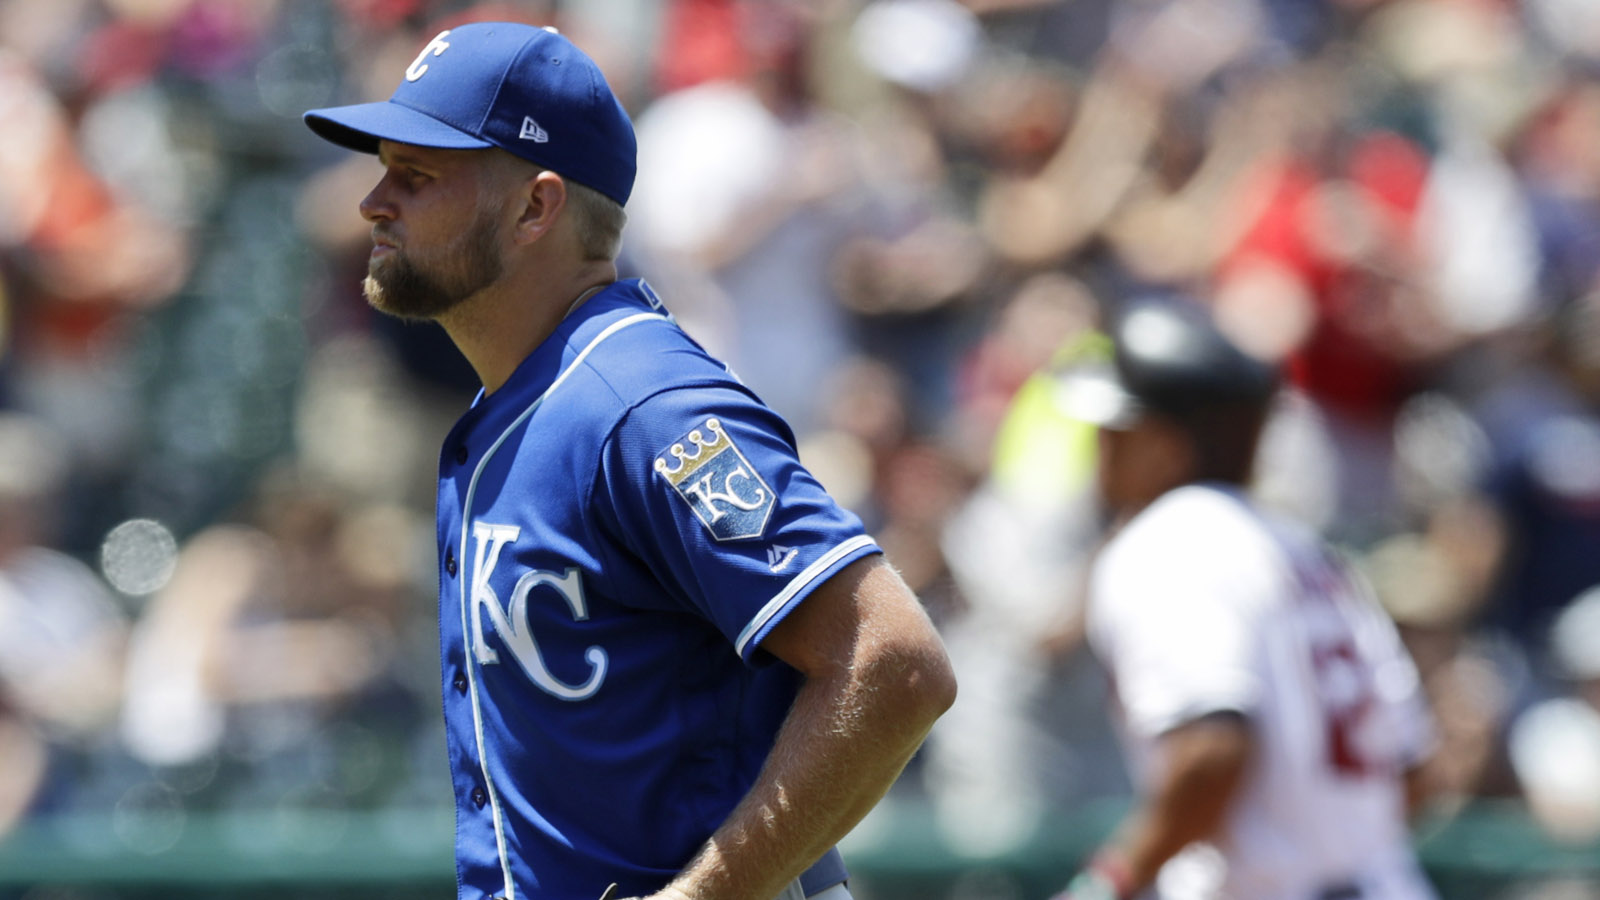 Royals fall 5-4 in rubber game with Indians